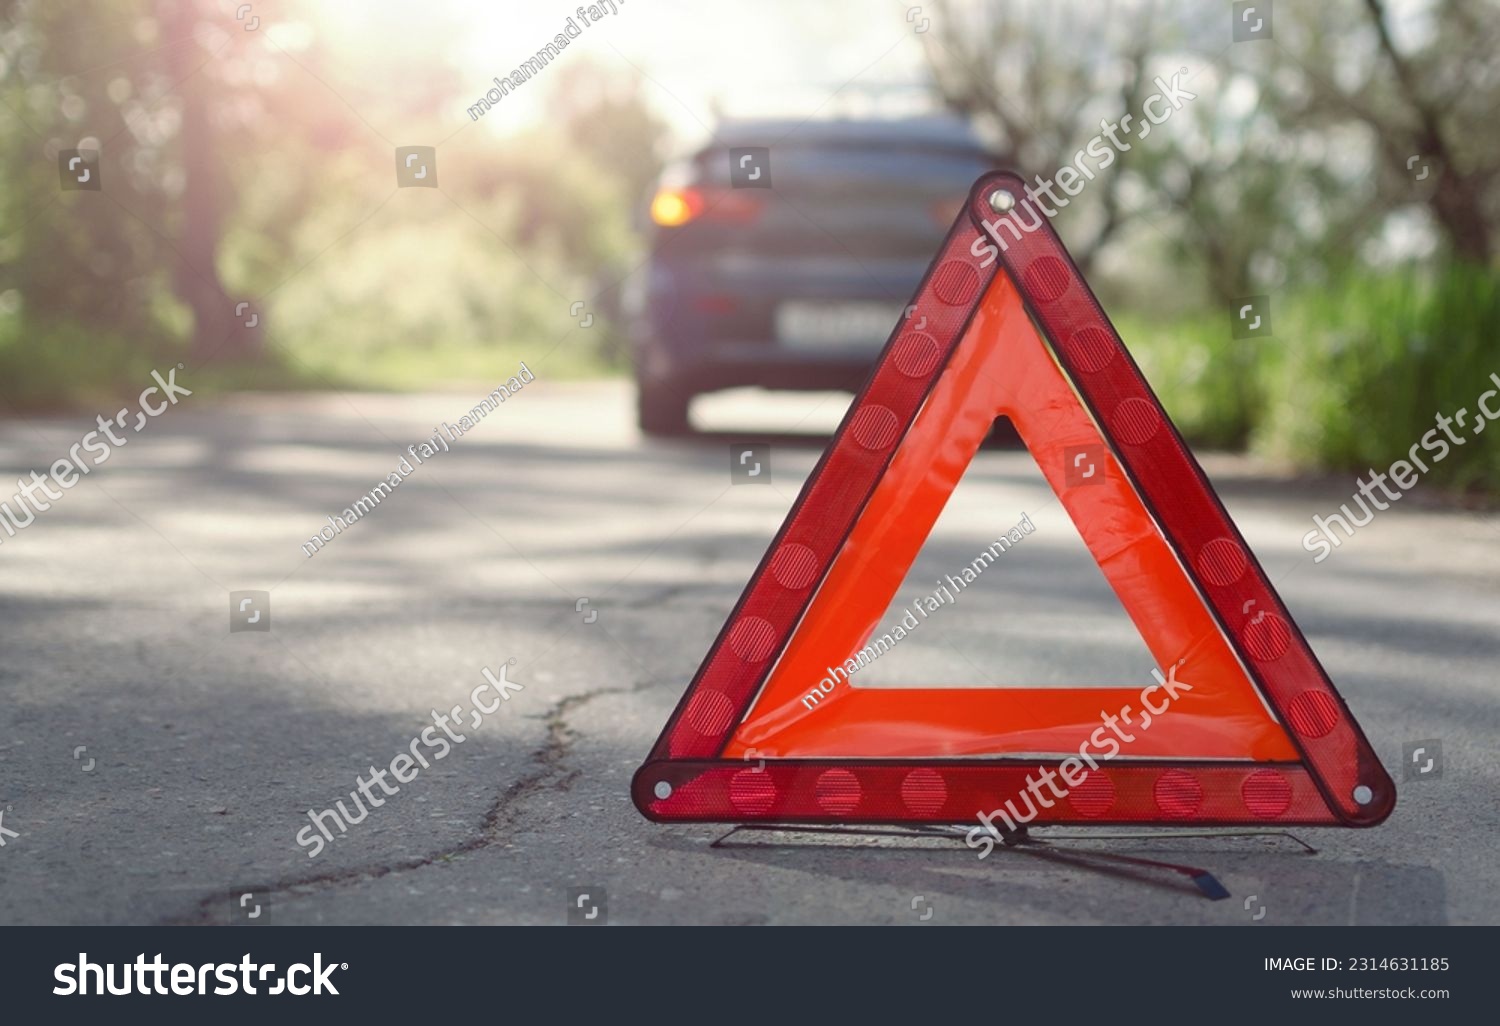 The warning triangle is at the back of the car at a safe distance.Car on the road behind warning triangle.The triangle placed behind the car. #2314631185